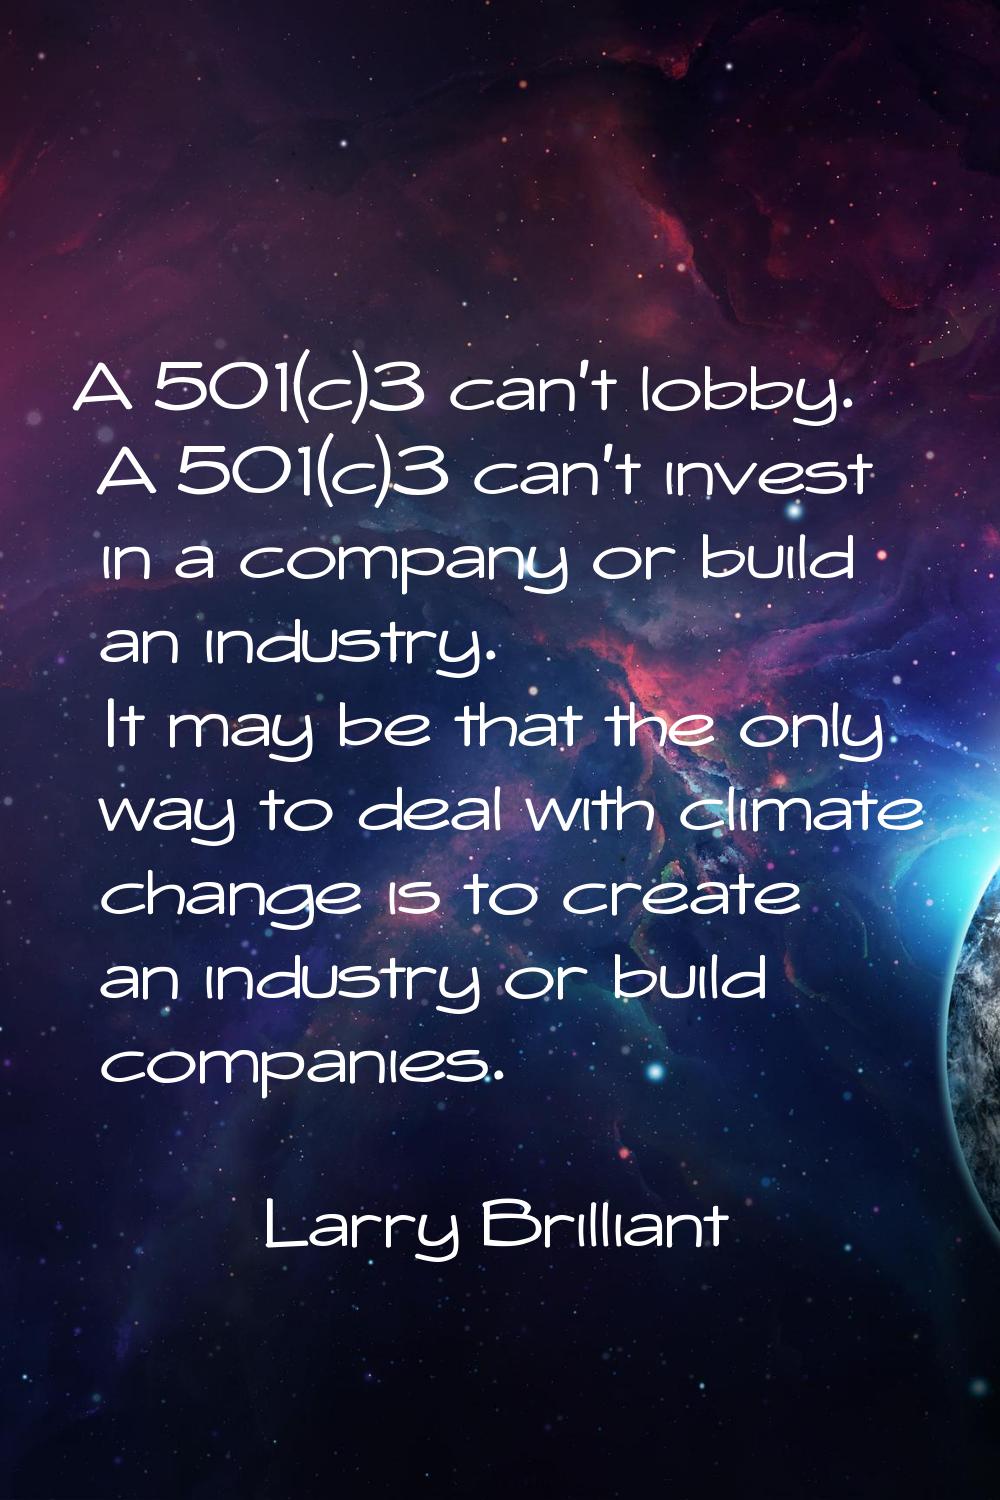 A 501(c)3 can't lobby. A 501(c)3 can't invest in a company or build an industry. It may be that the